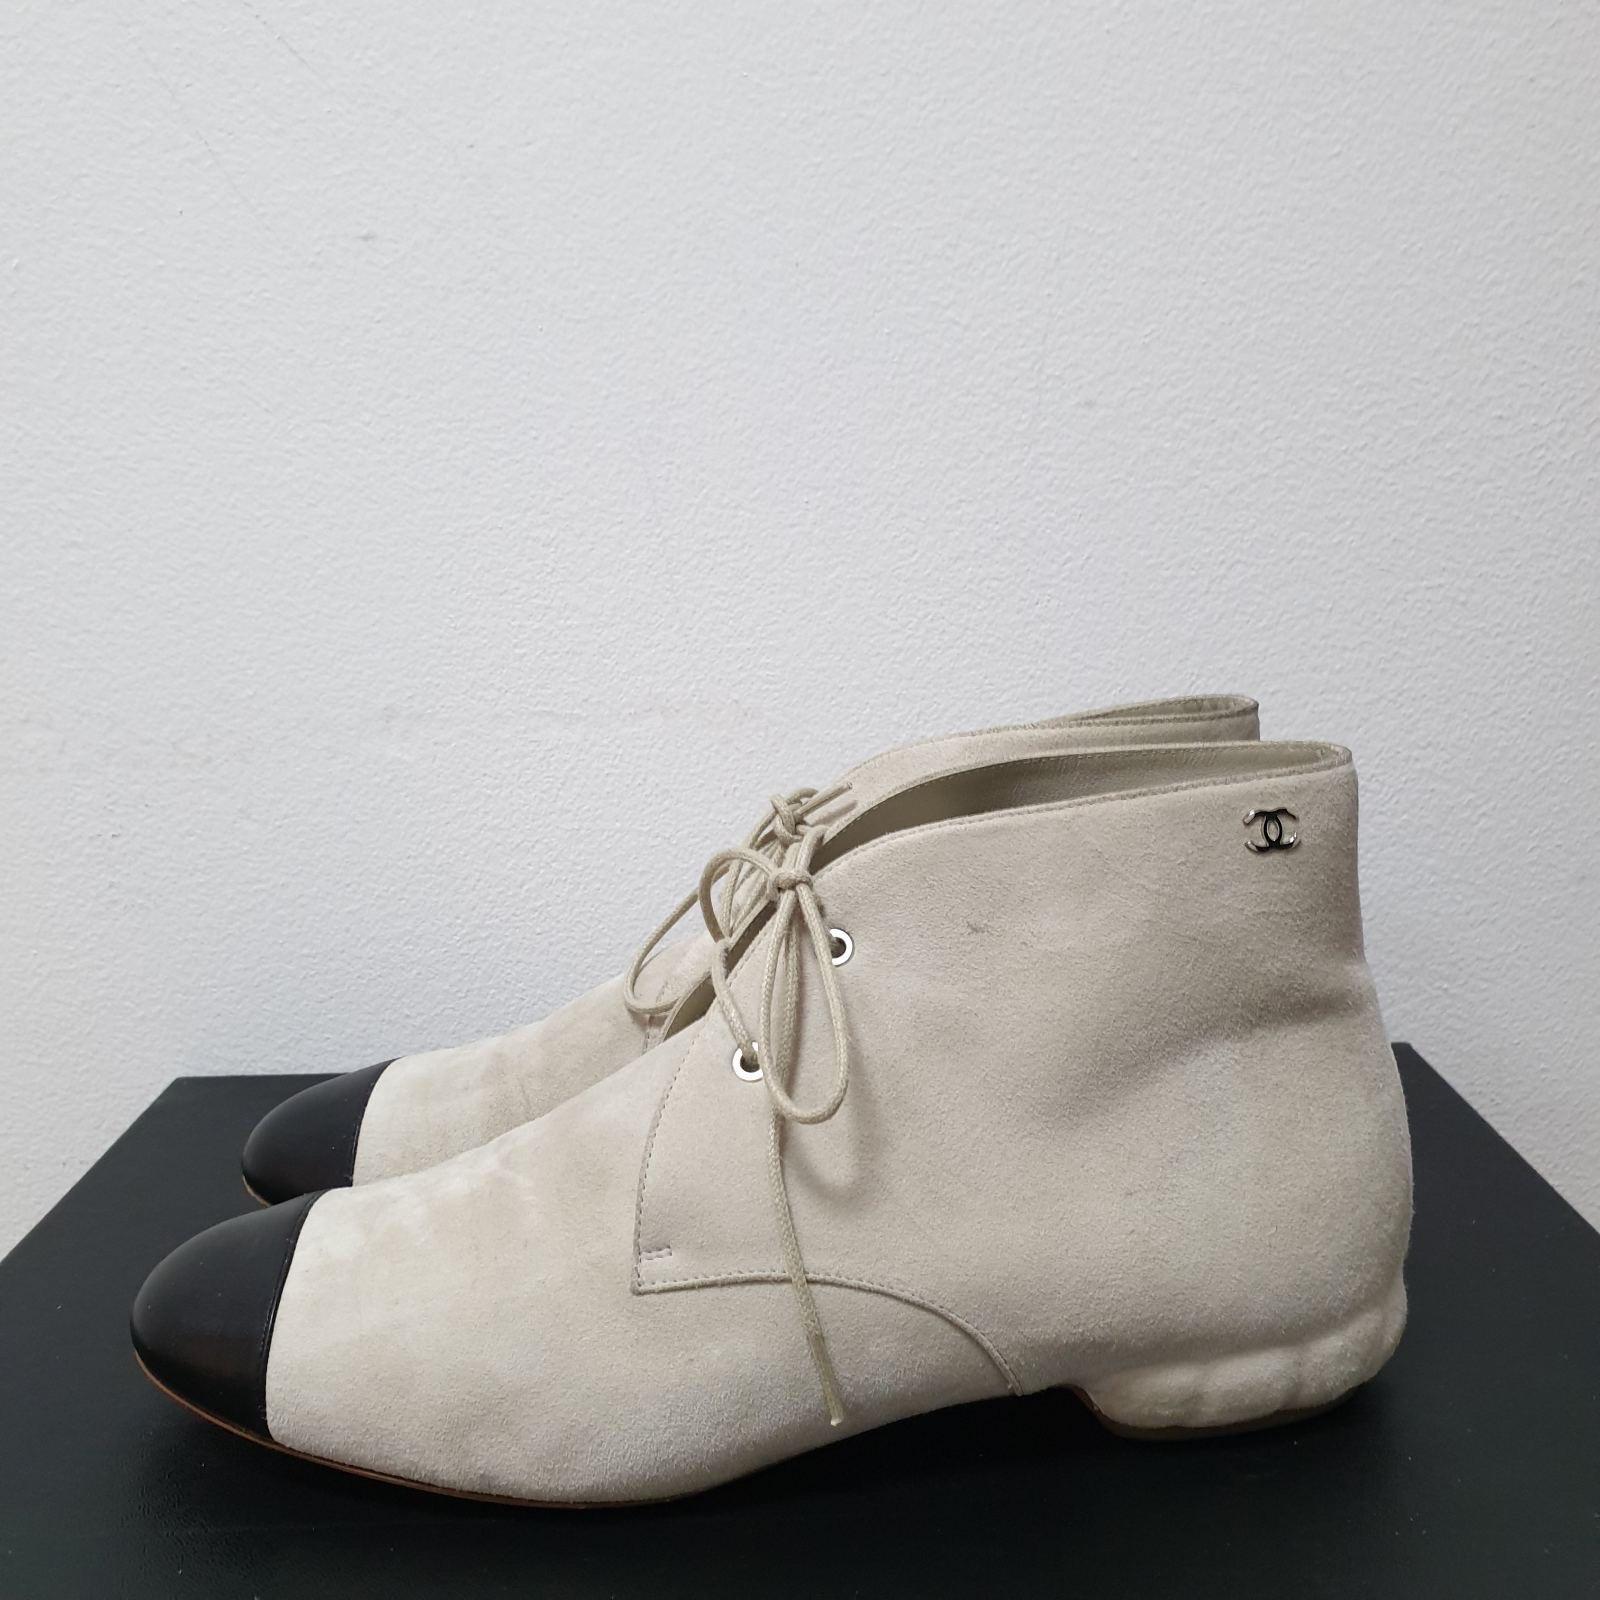 Off-white neutral suede with black leather cap-toe
Interlocking CC logo at side
Round toe
Lace-up closure at uppers
Sz. 39
No box, no dust bag